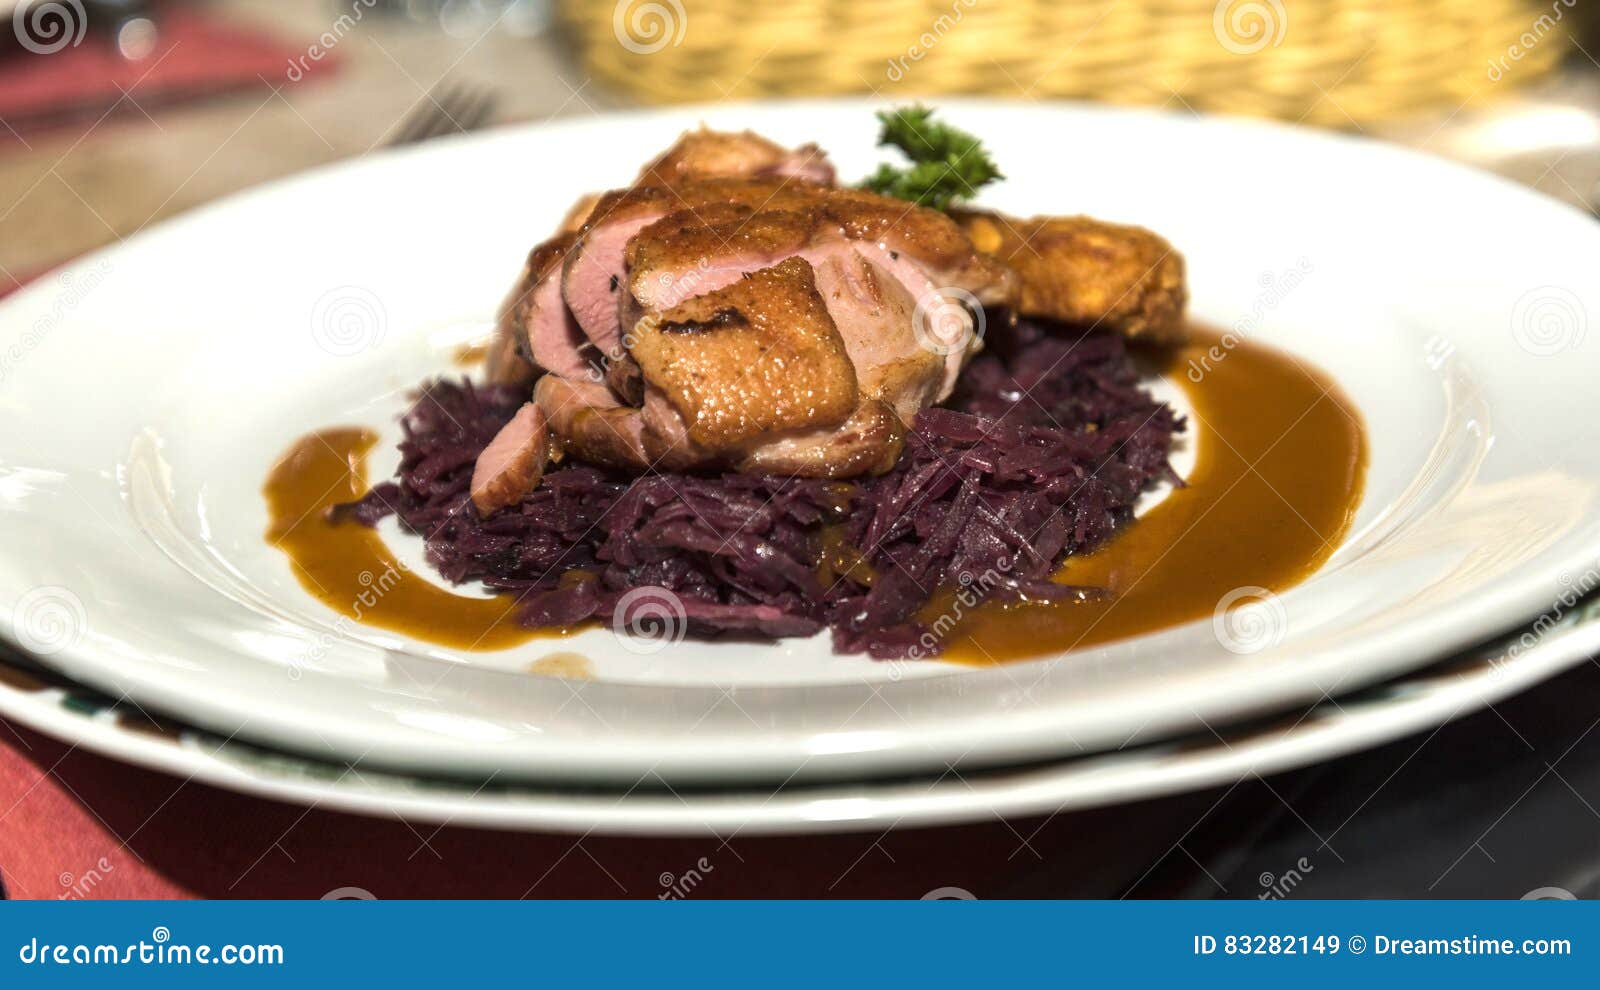 roasted duck on red cabbages